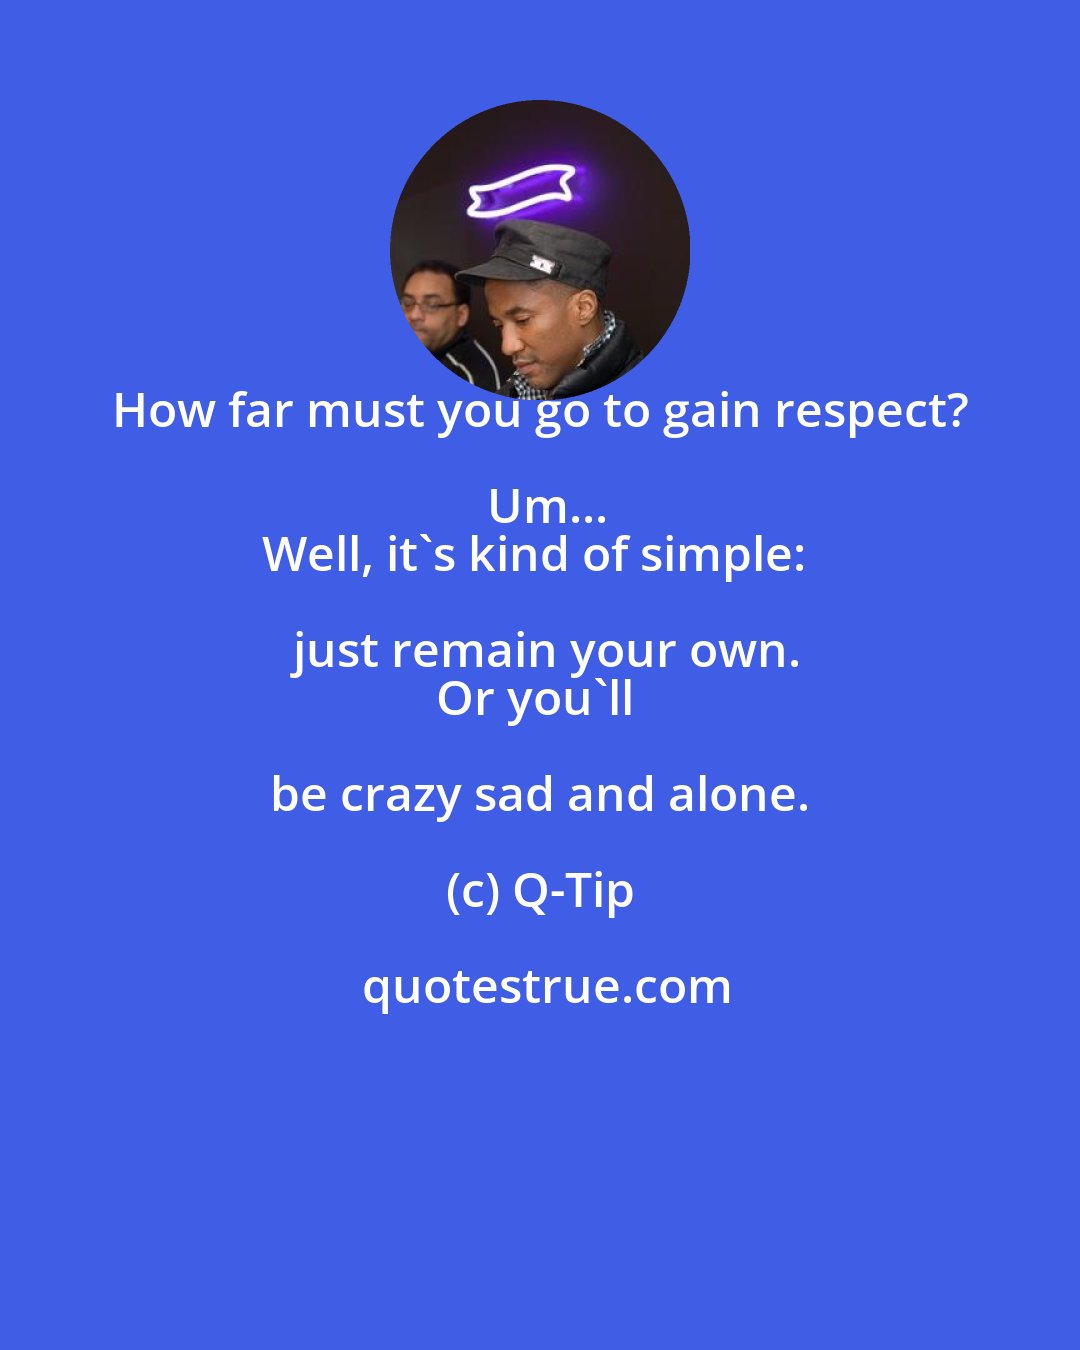 Q-Tip: How far must you go to gain respect? Um...
Well, it's kind of simple: just remain your own.
Or you'll be crazy sad and alone.